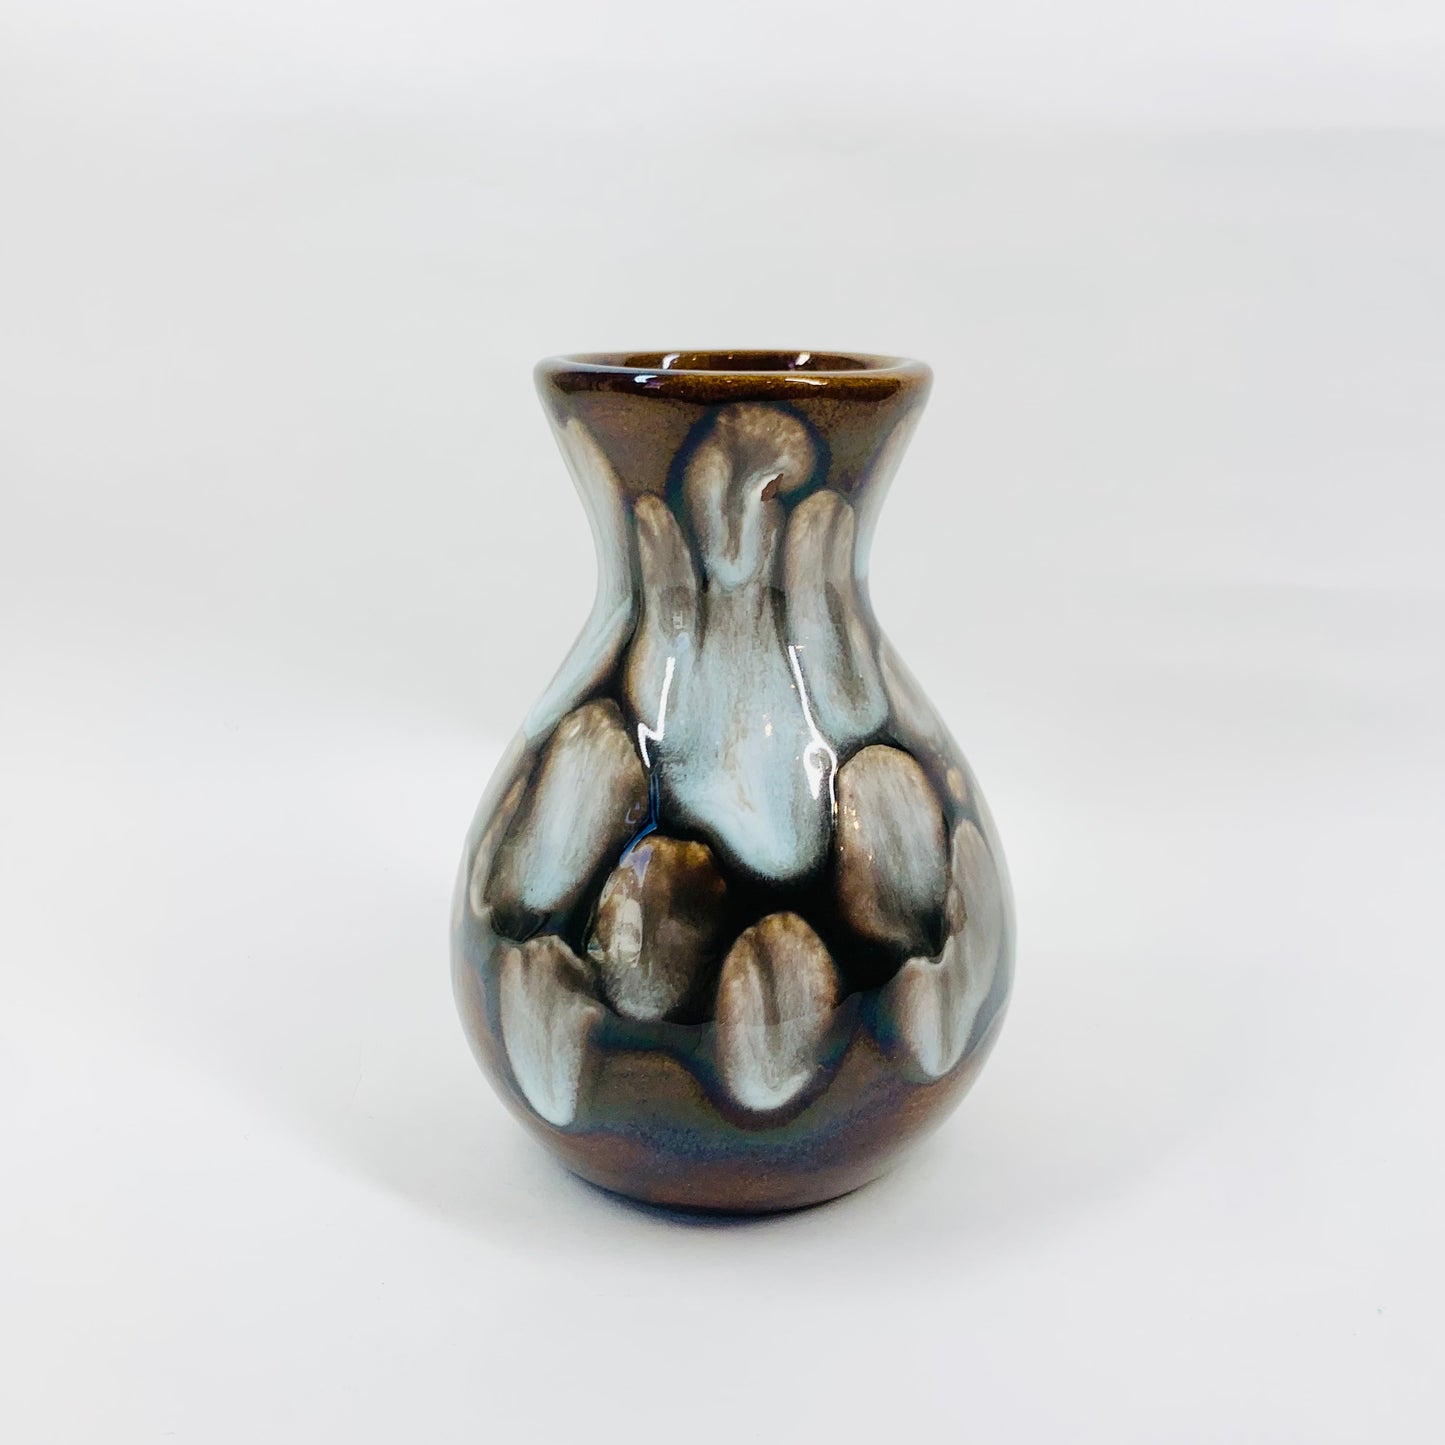 Retro Japanese pottery bottle vase with blue clouds